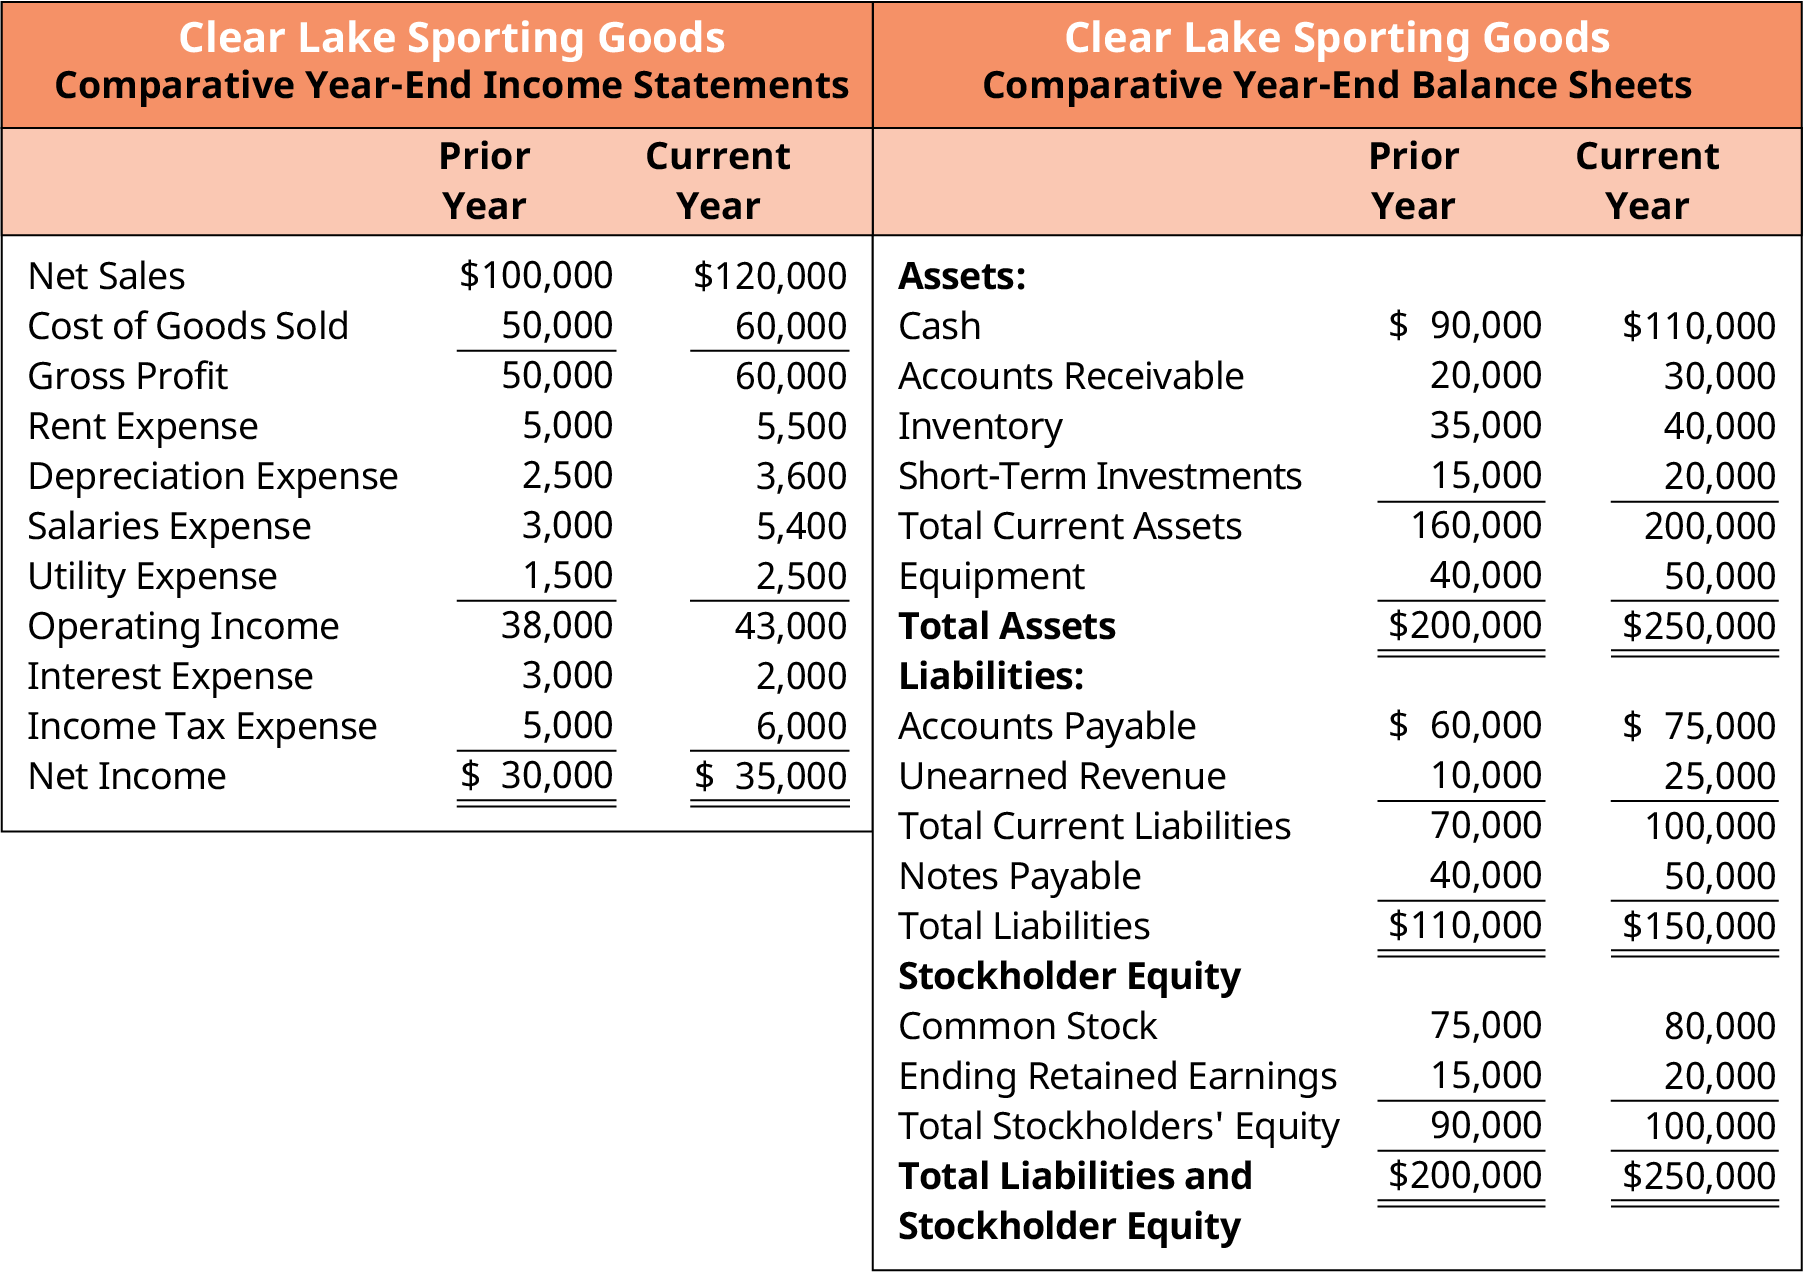 There are two comparative year end statements for Clear Lake Sporting Goods: the comparative year end income statements and the comparative year end balance sheets. The comparative year end income statements for Clear Lake Sporting Goods compares the prior year to the current year. Respectively, net sales are $100,000 and $120,000. Cost of goods sold is $50,000 and $60,000. Gross profit is $50,000 and $60,000. Rent expense is $5,000 and $5,500. Depreciation expense is $2,500 and $3,600. Salaries expense is $3,000 and $5,400. Utility expense is $1,500 and $2,500. Operating income is $38,000 and $43,000. Interest expense is $3,000 and $2,000. Income tax expense is $5,000 and $6,000. Net income is $30,000 and $35,000. The comparative year end balance sheets for Clear Lake Sporting Goods compares the prior year to the current year. Respectively, cash assets are $90,000 and $110,000. Accounts receivable assets are $20,000 and $30,000. Inventory assets are $35,000 and $40,000. Short-term investments are $15,000 and $20,000. Total current assets are $160,000 and $200,000. Equipment assets are $40,000 and $50,000. Total assets are $200,000 and $250,000. Respectively, accounts payable liabilities are $60,000 and $75,000. Unearned revenue liabilities are $10,000 and $25,000. Total current liabilities are $70,000 and $100,000. Notes payable liabilities are $40,000 and $50,000. Total liabilities are $110,000 and $150,000. Respectively, stockholder equity of common stock is $75,000 and $80,000, ending retained earnings are $15,000 and $20,000, total stockholder equity is $90,000 and $100,000, and total liability and stockholder equity is $200,000 and $250,000.